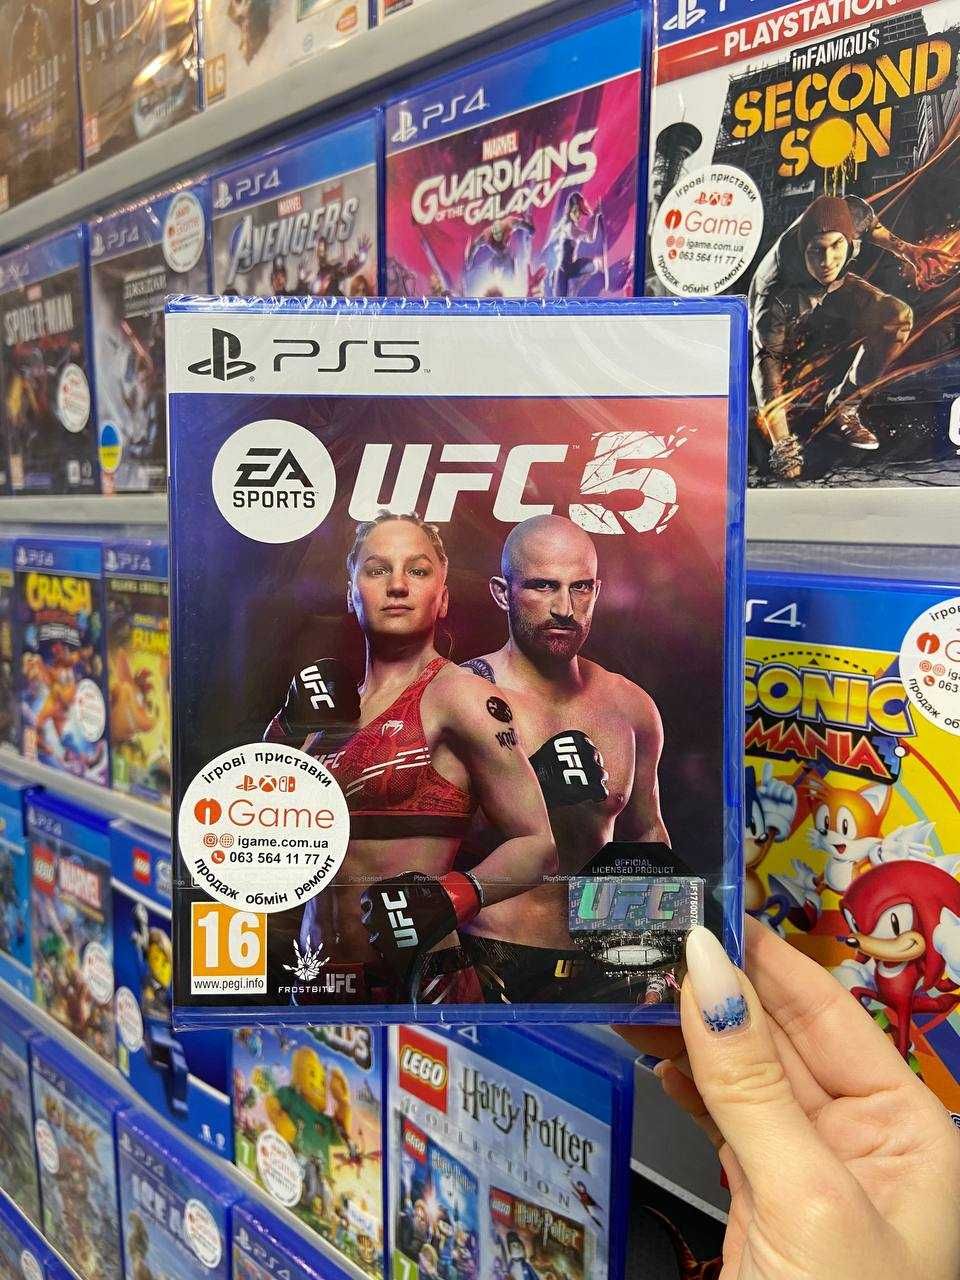 UFC 5, ЮФС, PS5 Sony PlayStation 5, igame